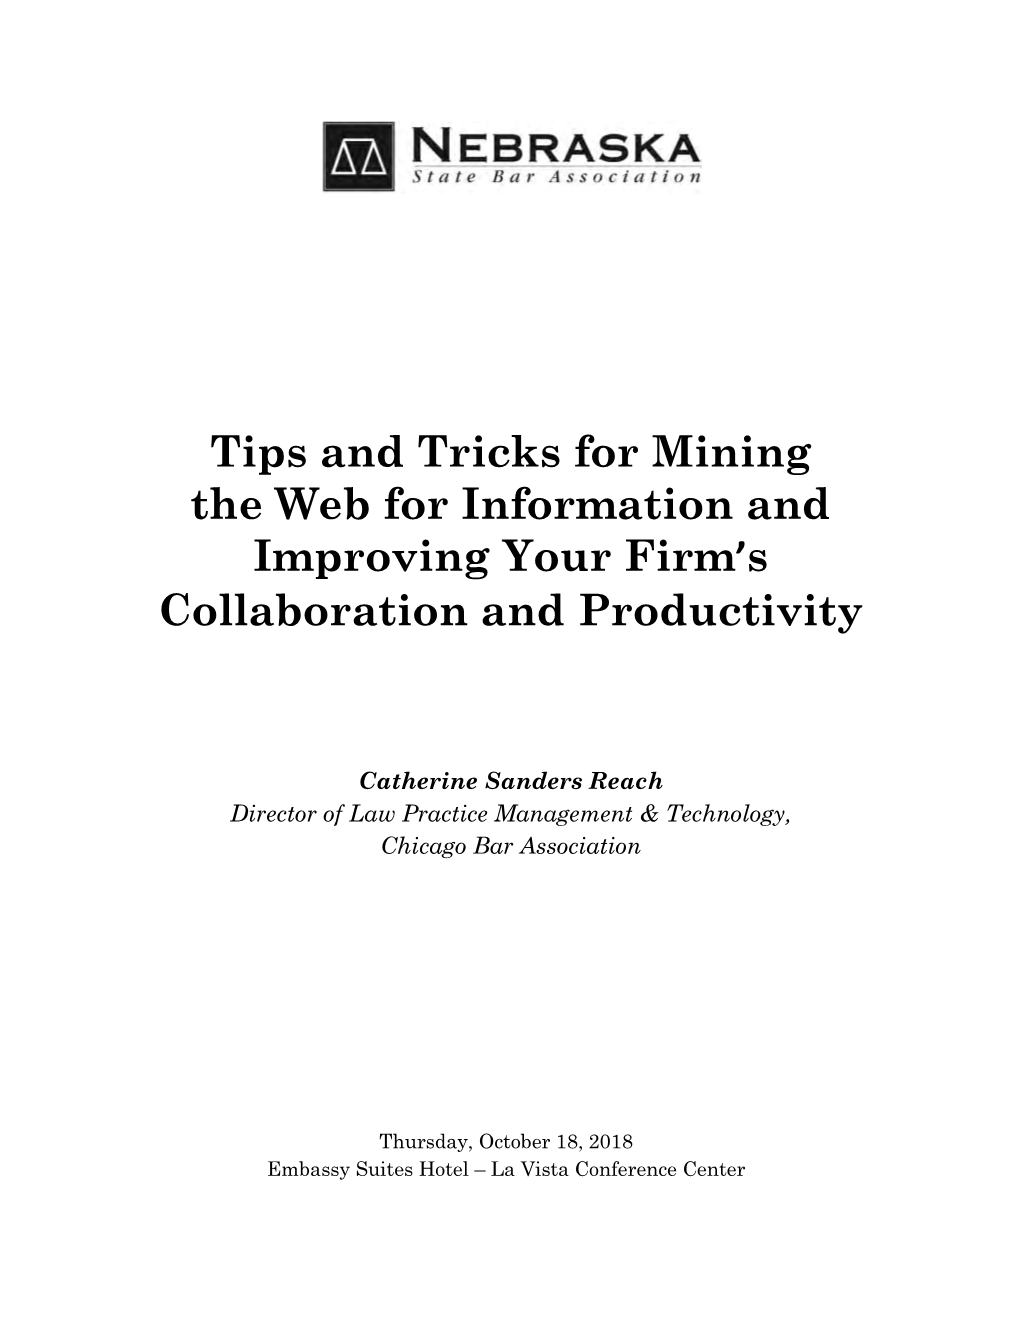 Tips and Tricks for Mining the Web for Information and Improving Your Firm’S Collaboration and Productivity